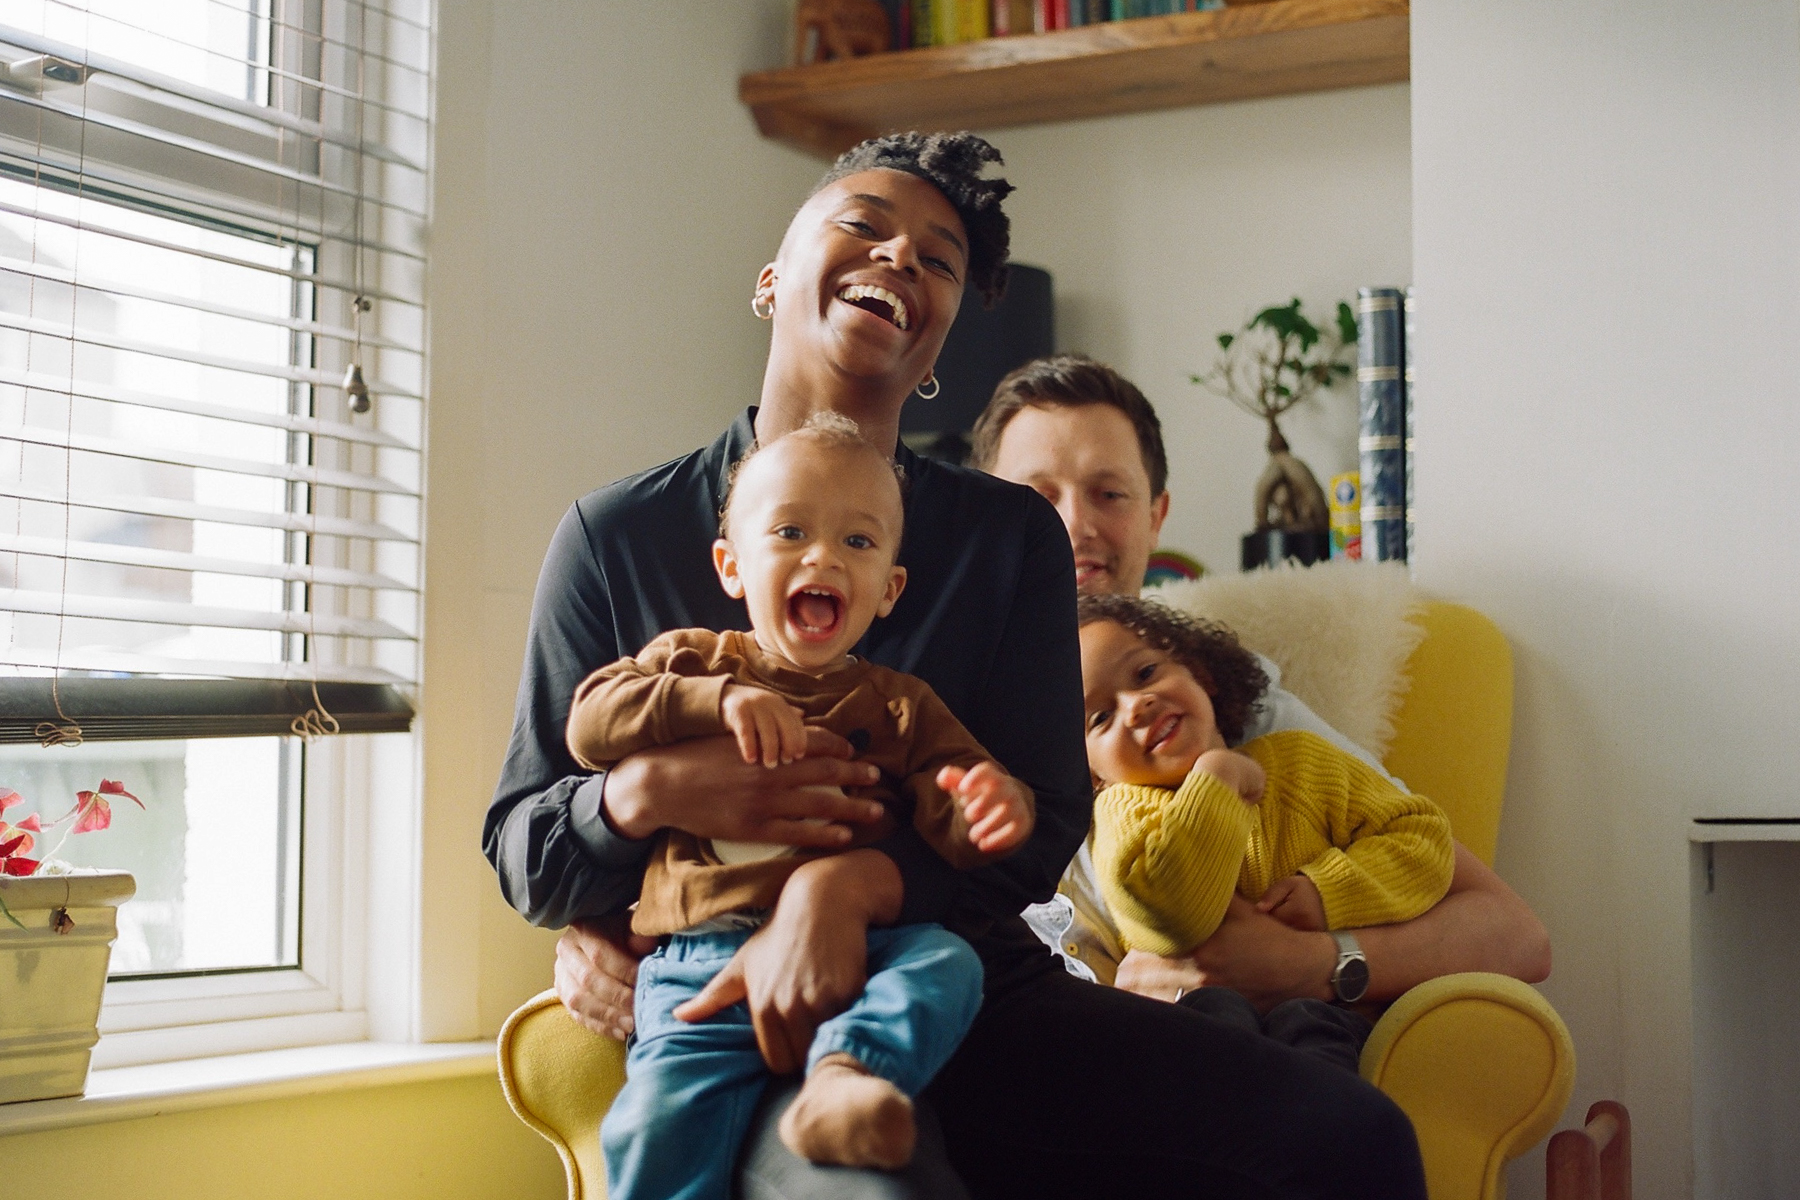 A photo of parents Ashleigh and Dan holding their two children; they're sitting on a yellow armchair in their home and all are laughing and smiling